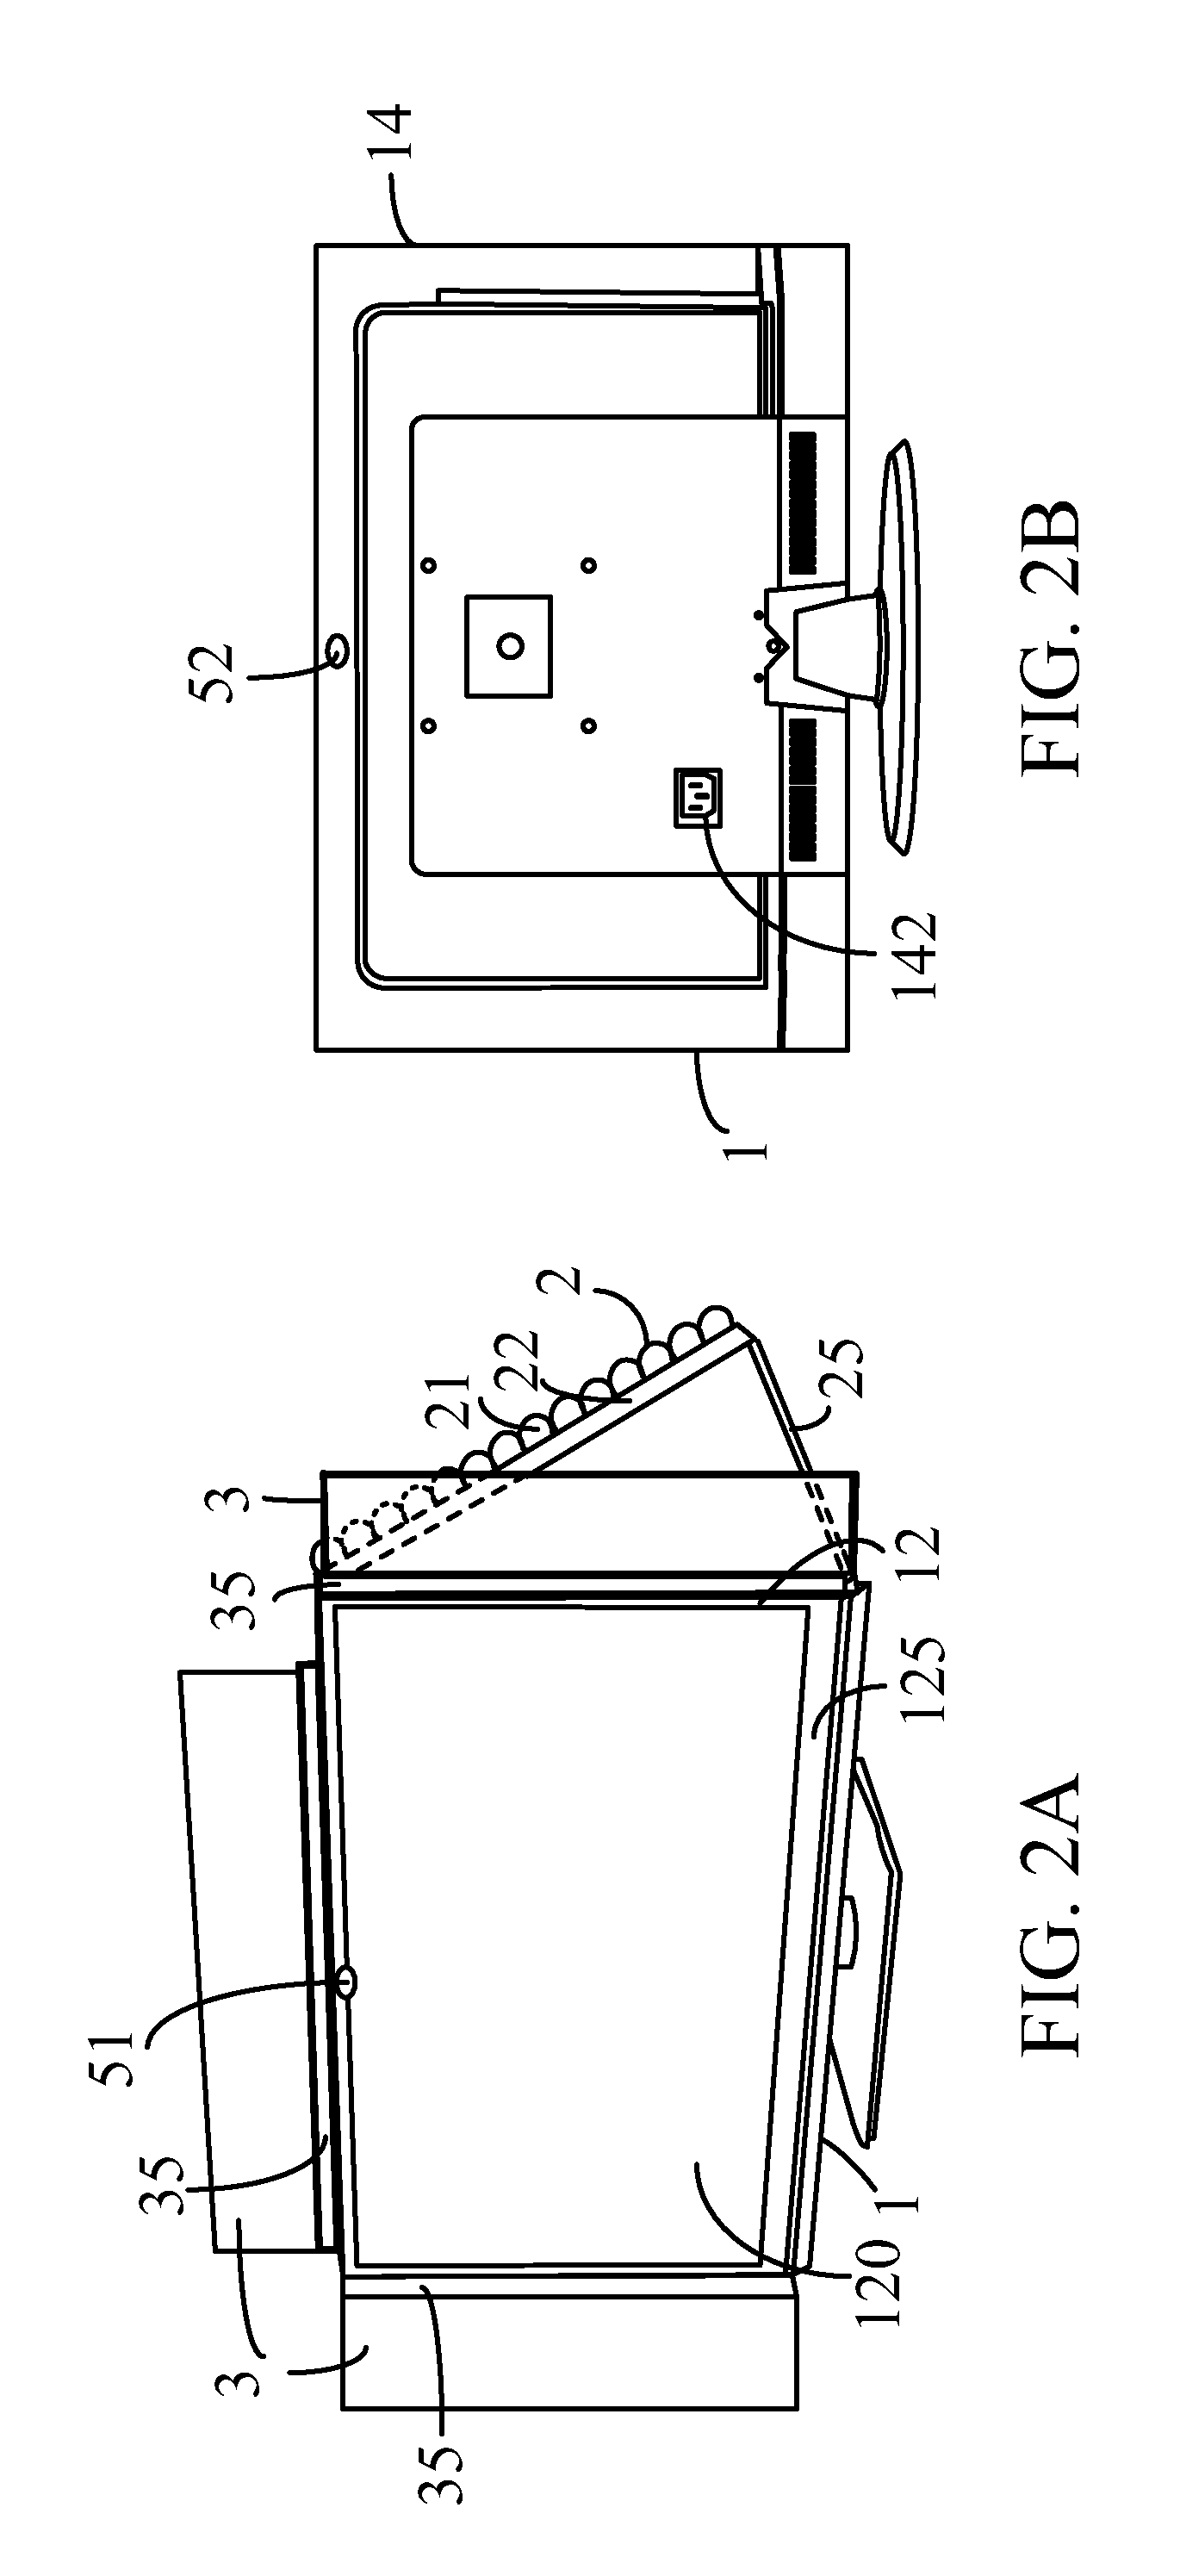 Background brightness compensating method and system for display apparatus